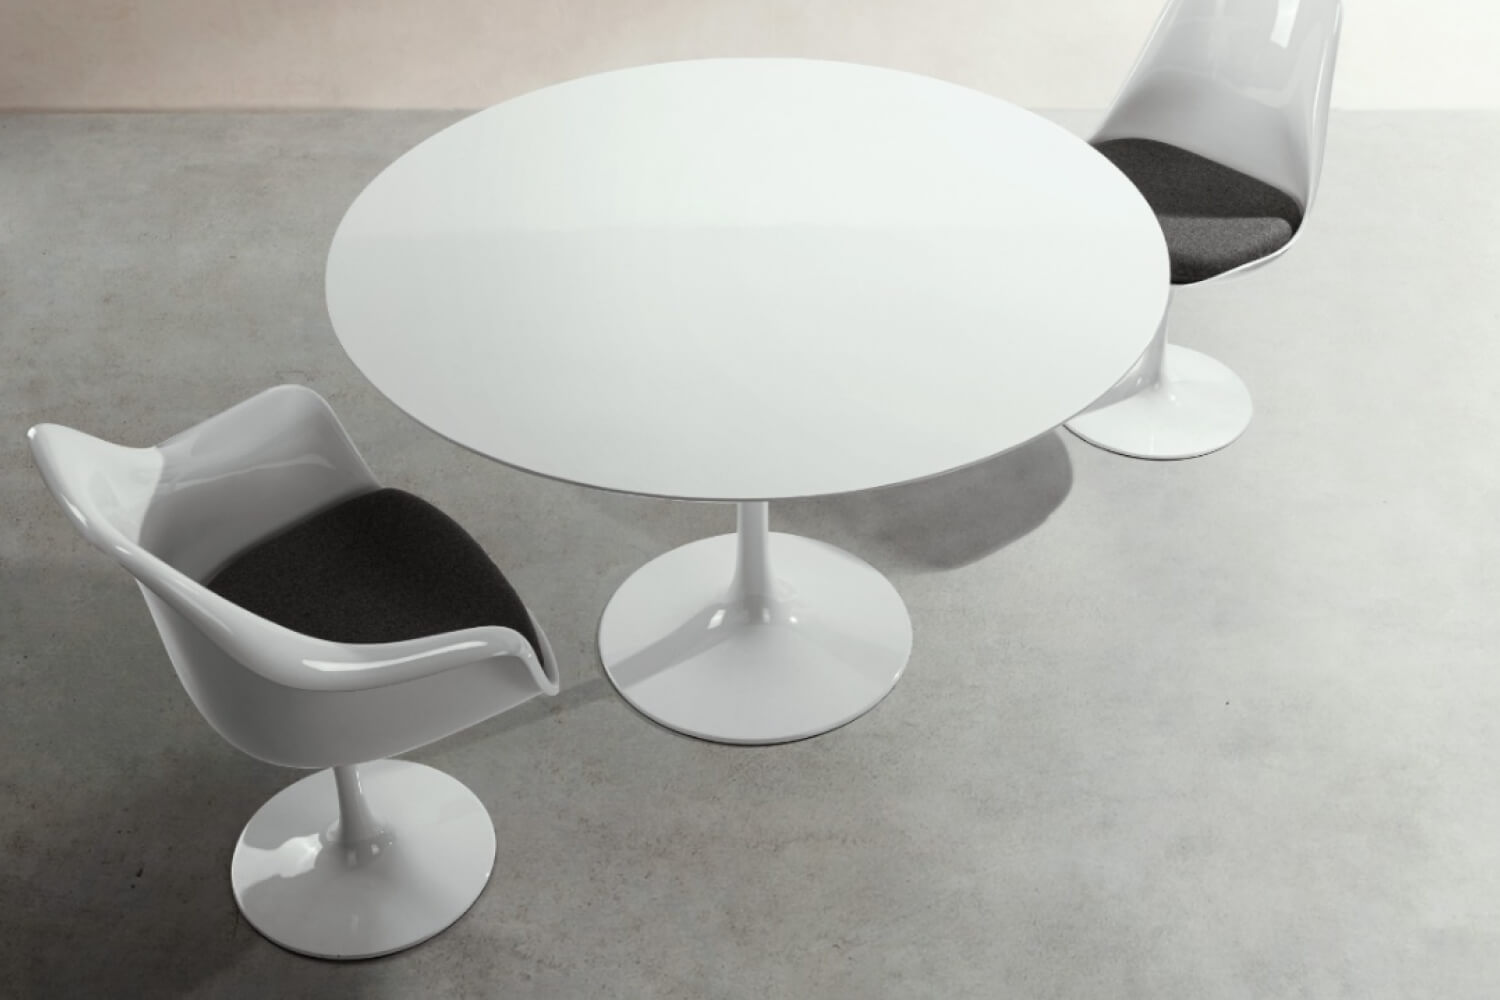 A modern dining setting featuring a white oval tulip table paired with two Tulip Armchairs made of fiberglass, showcasing a sleek design with a smooth white finish and contrasting black cushions, set against a subtle gray concrete floor.